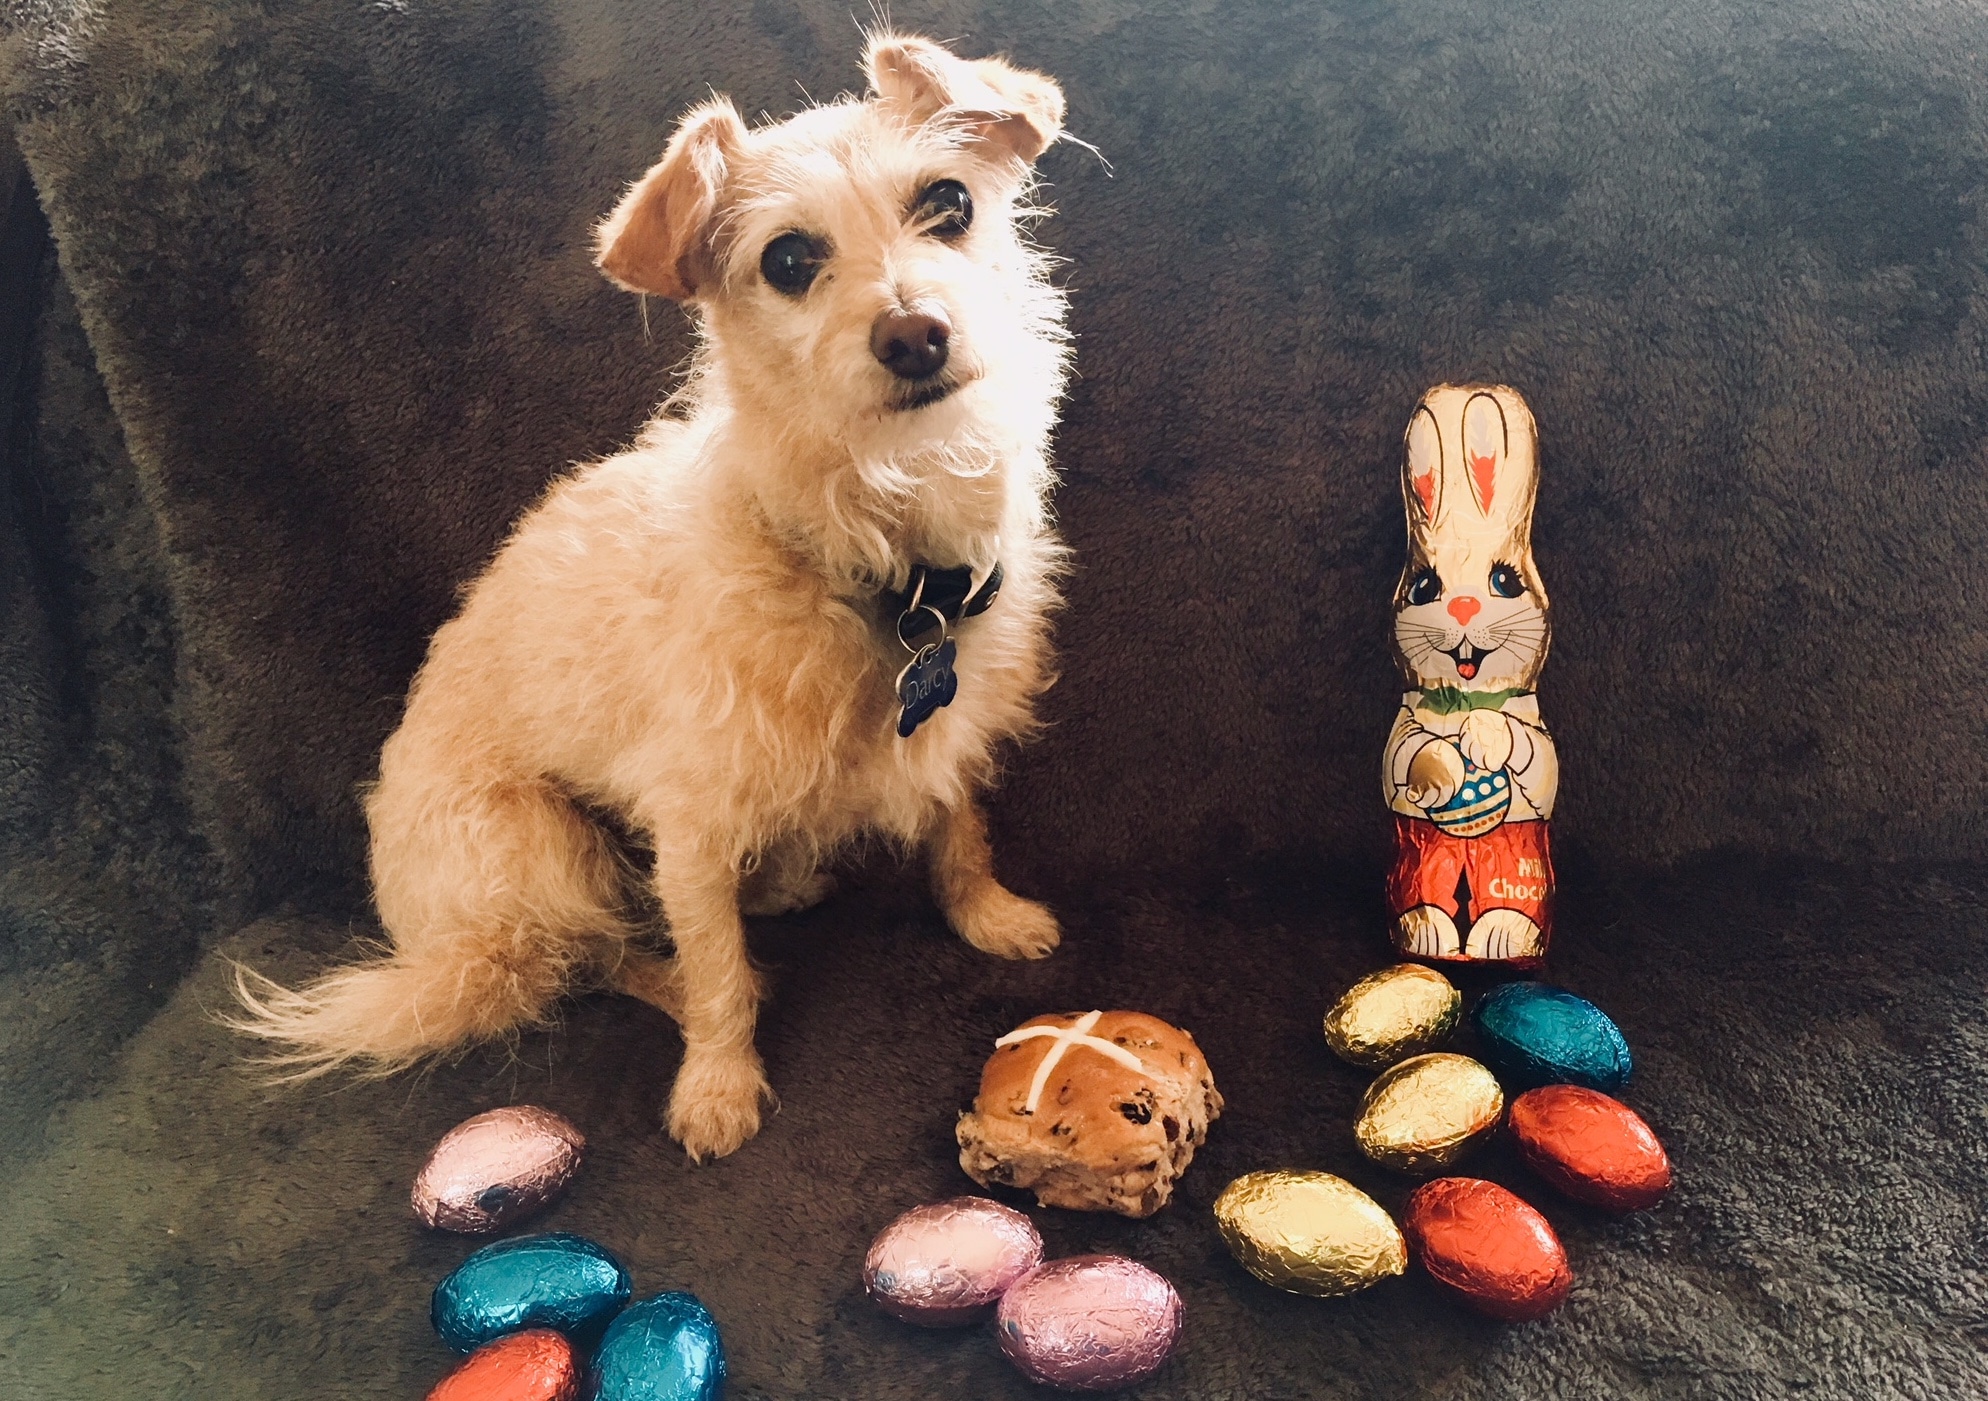 Top Tips for keeping your dog safe over Easter